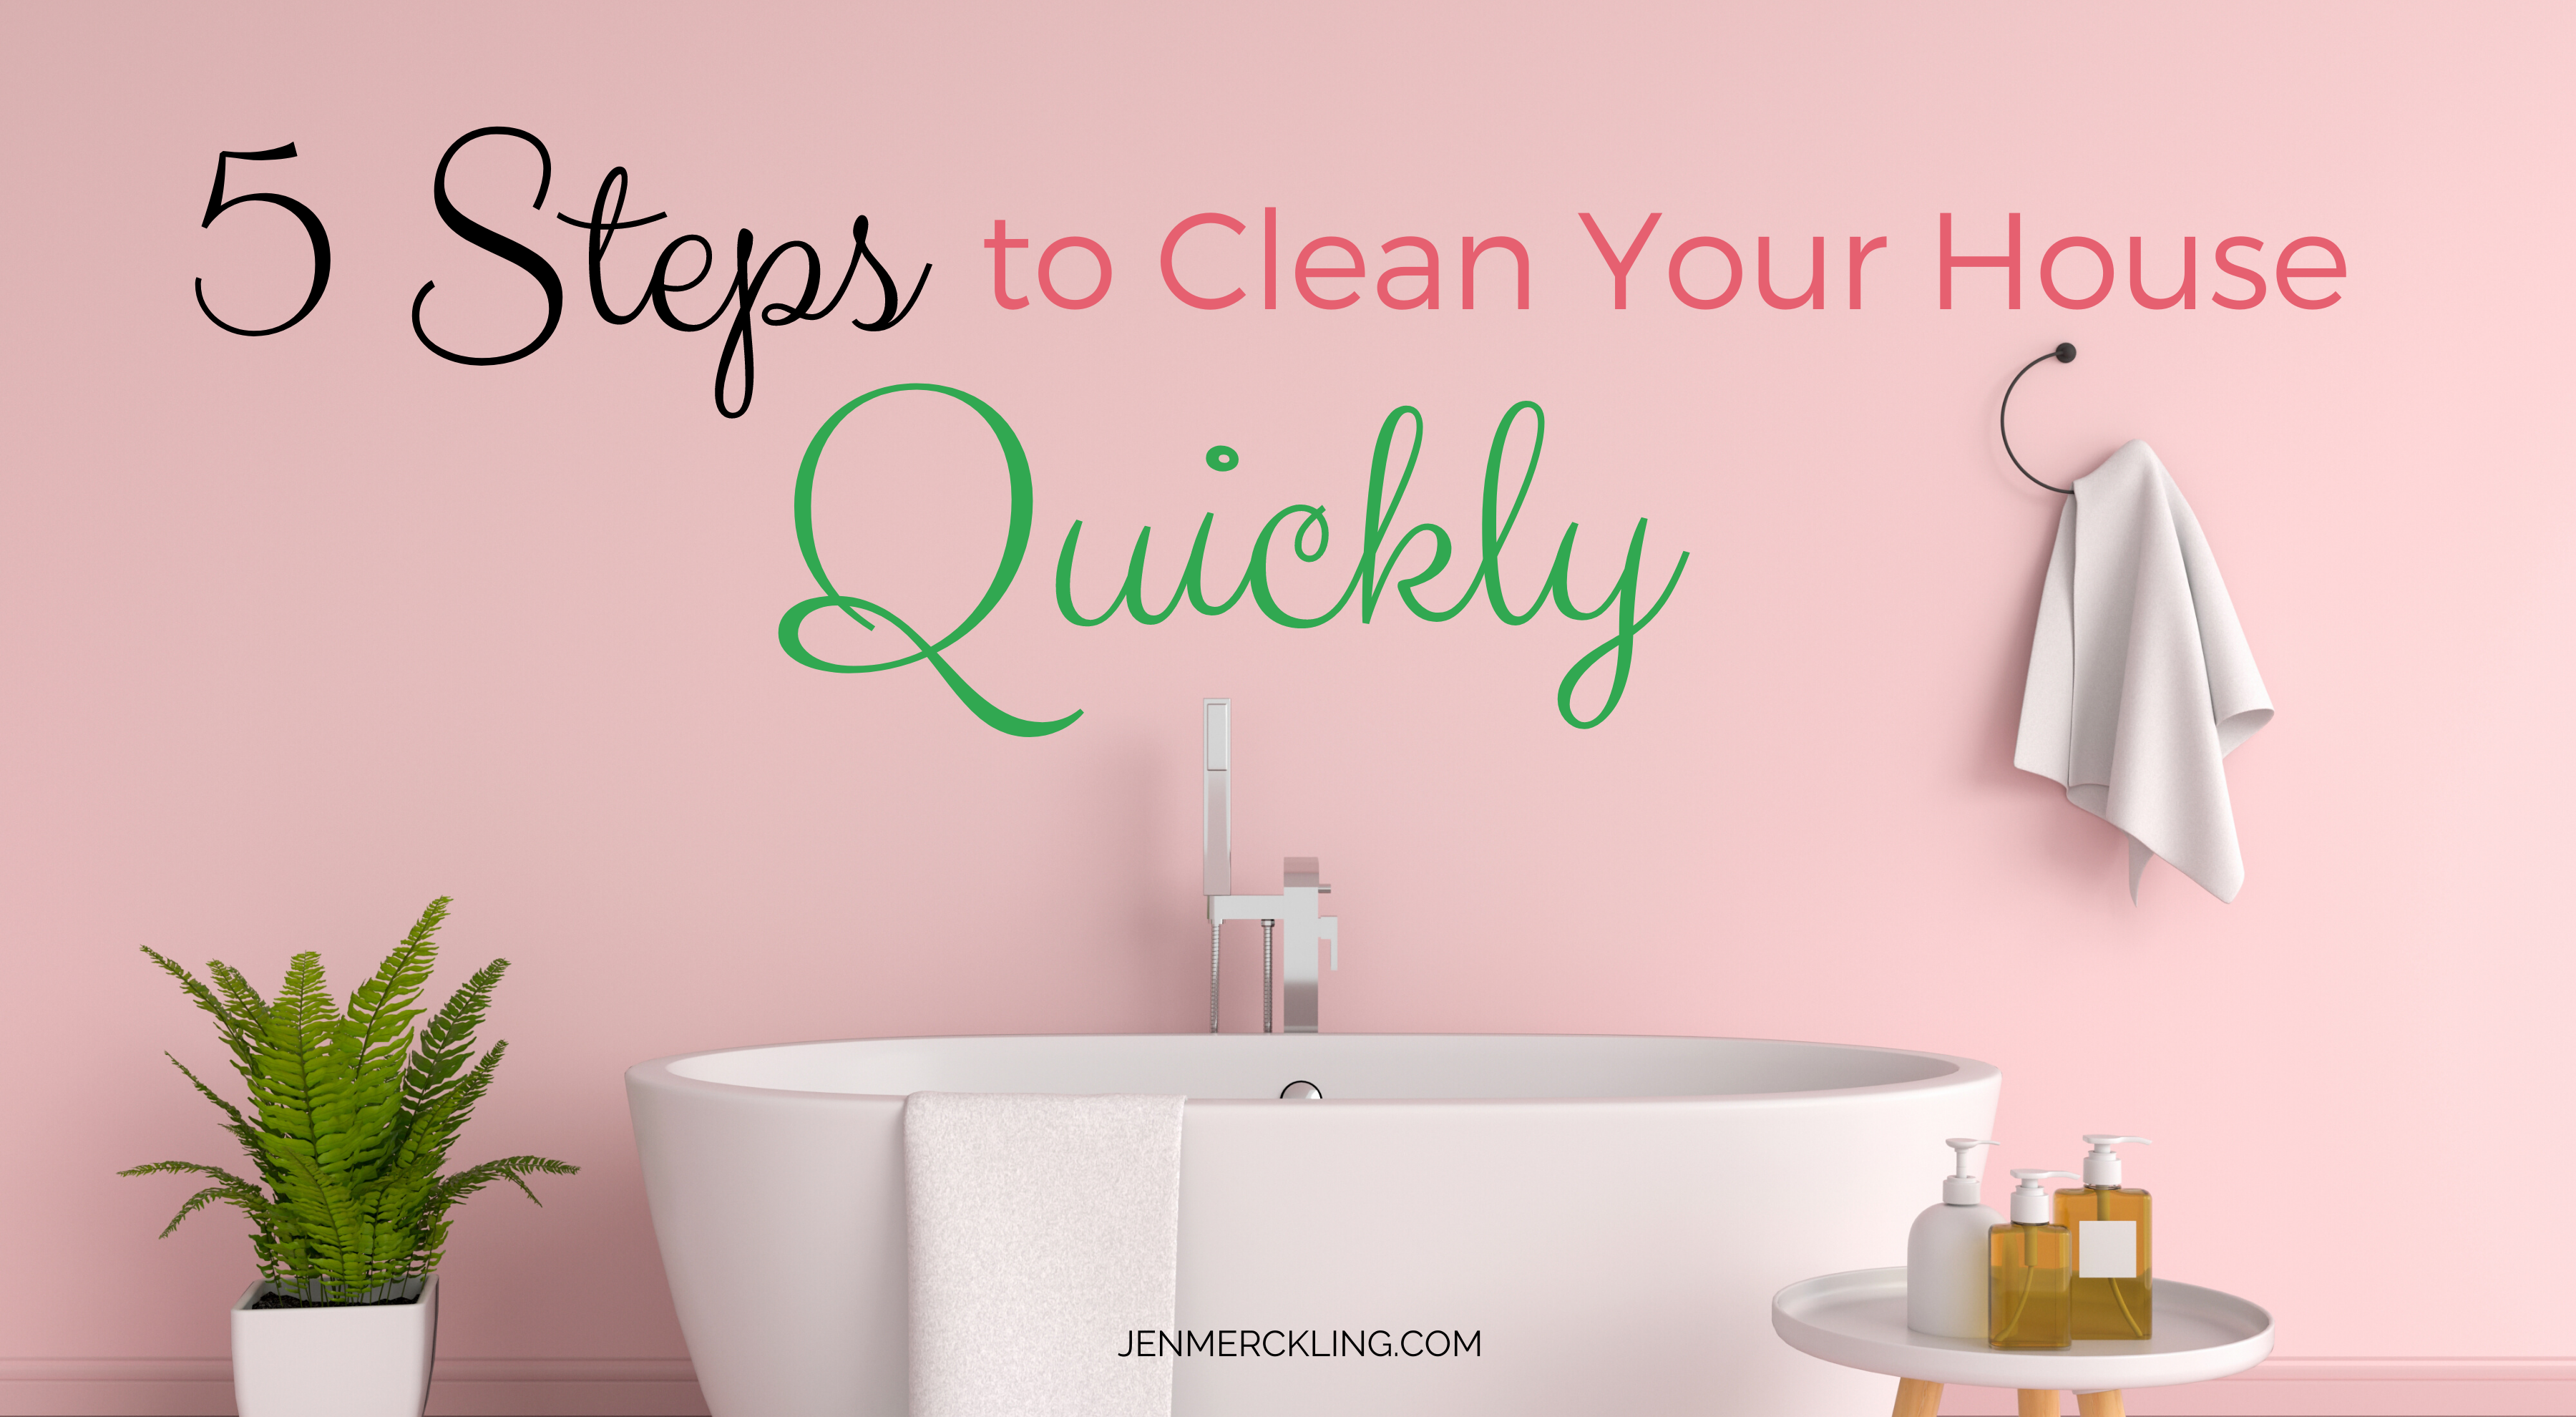 https://jenmerckling.com/wp-content/uploads/2019/12/Copy-of-Copy-of-How-to-Clean-Your-House-Feature.png